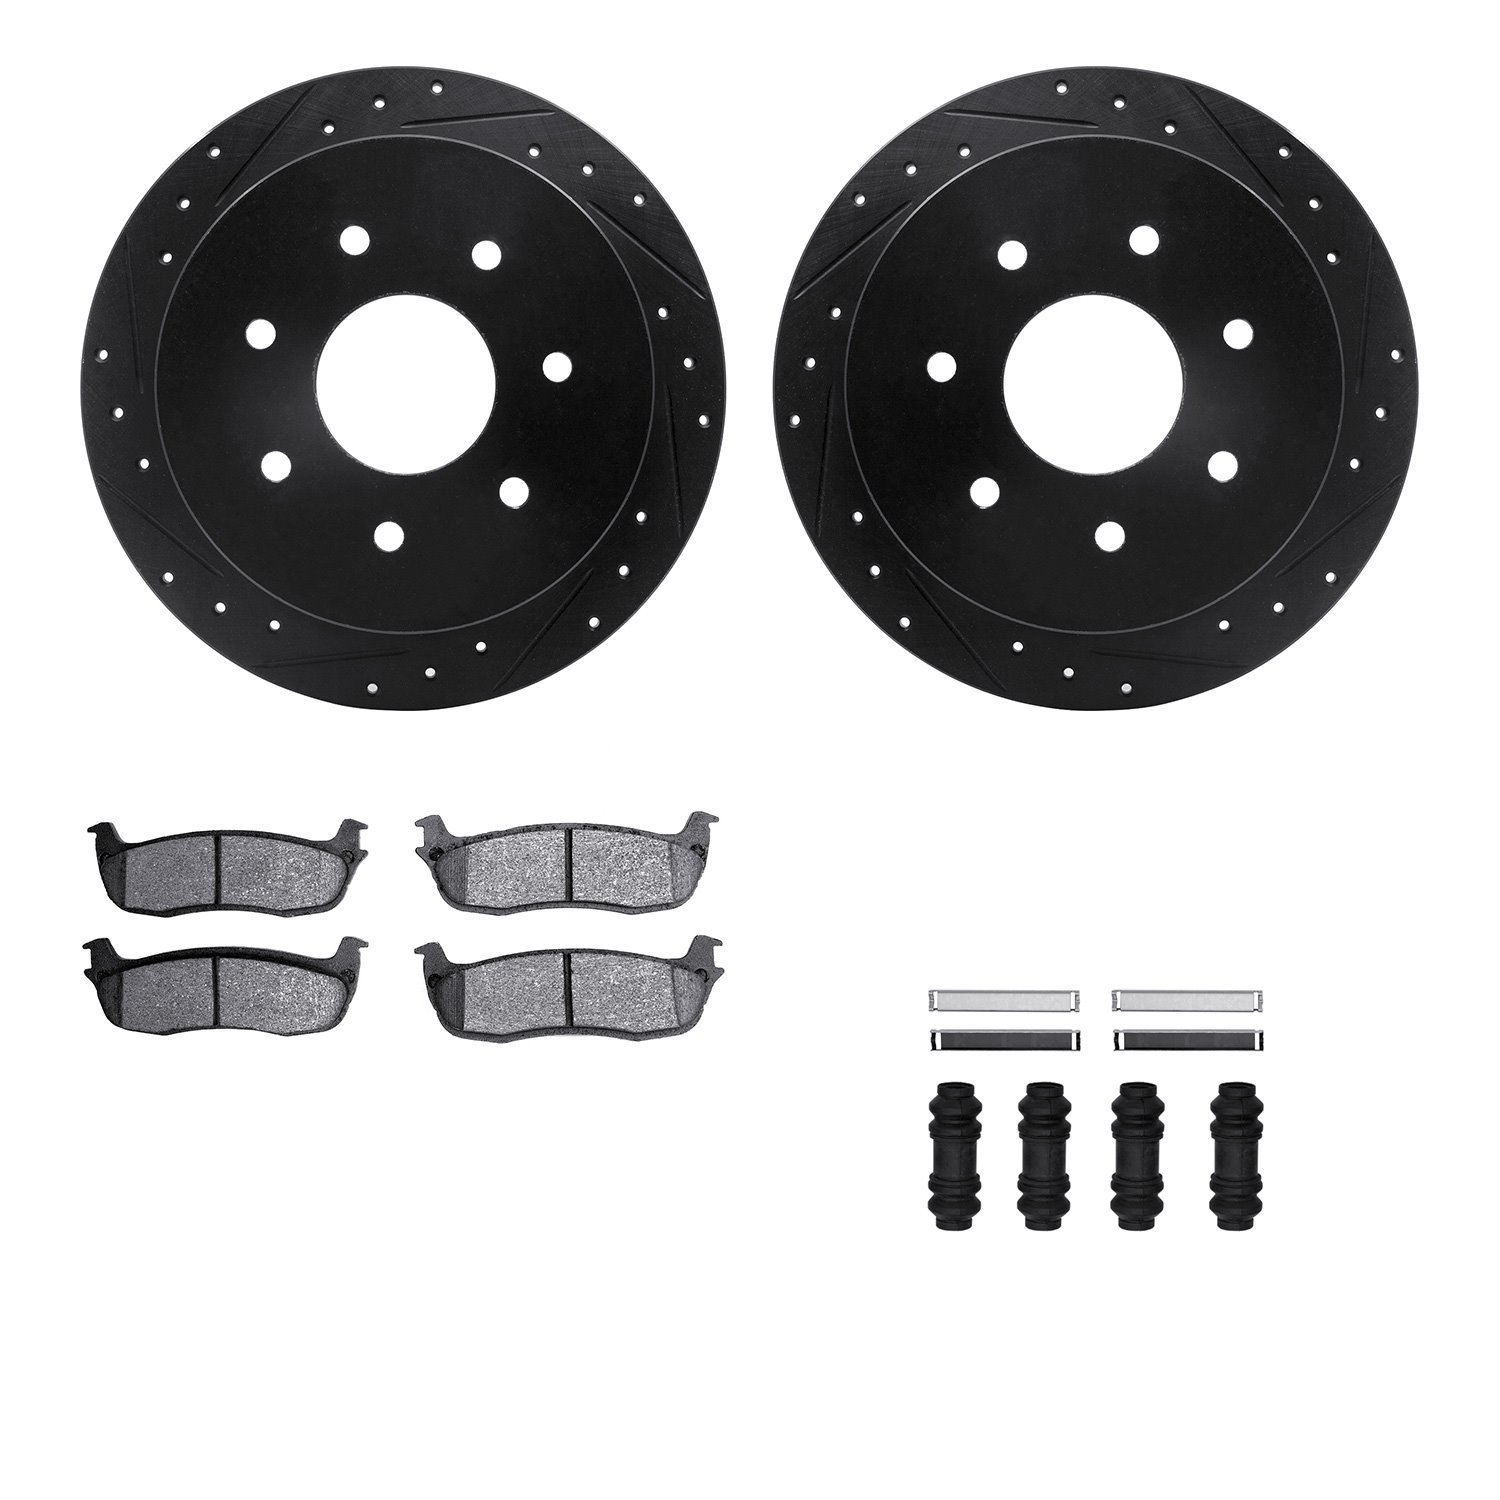 8412-54037 Drilled/Slotted Brake Rotors with Ultimate-Duty Brake Pads Kit & Hardware [Black], 1997-2004 Ford/Lincoln/Mercury/Maz